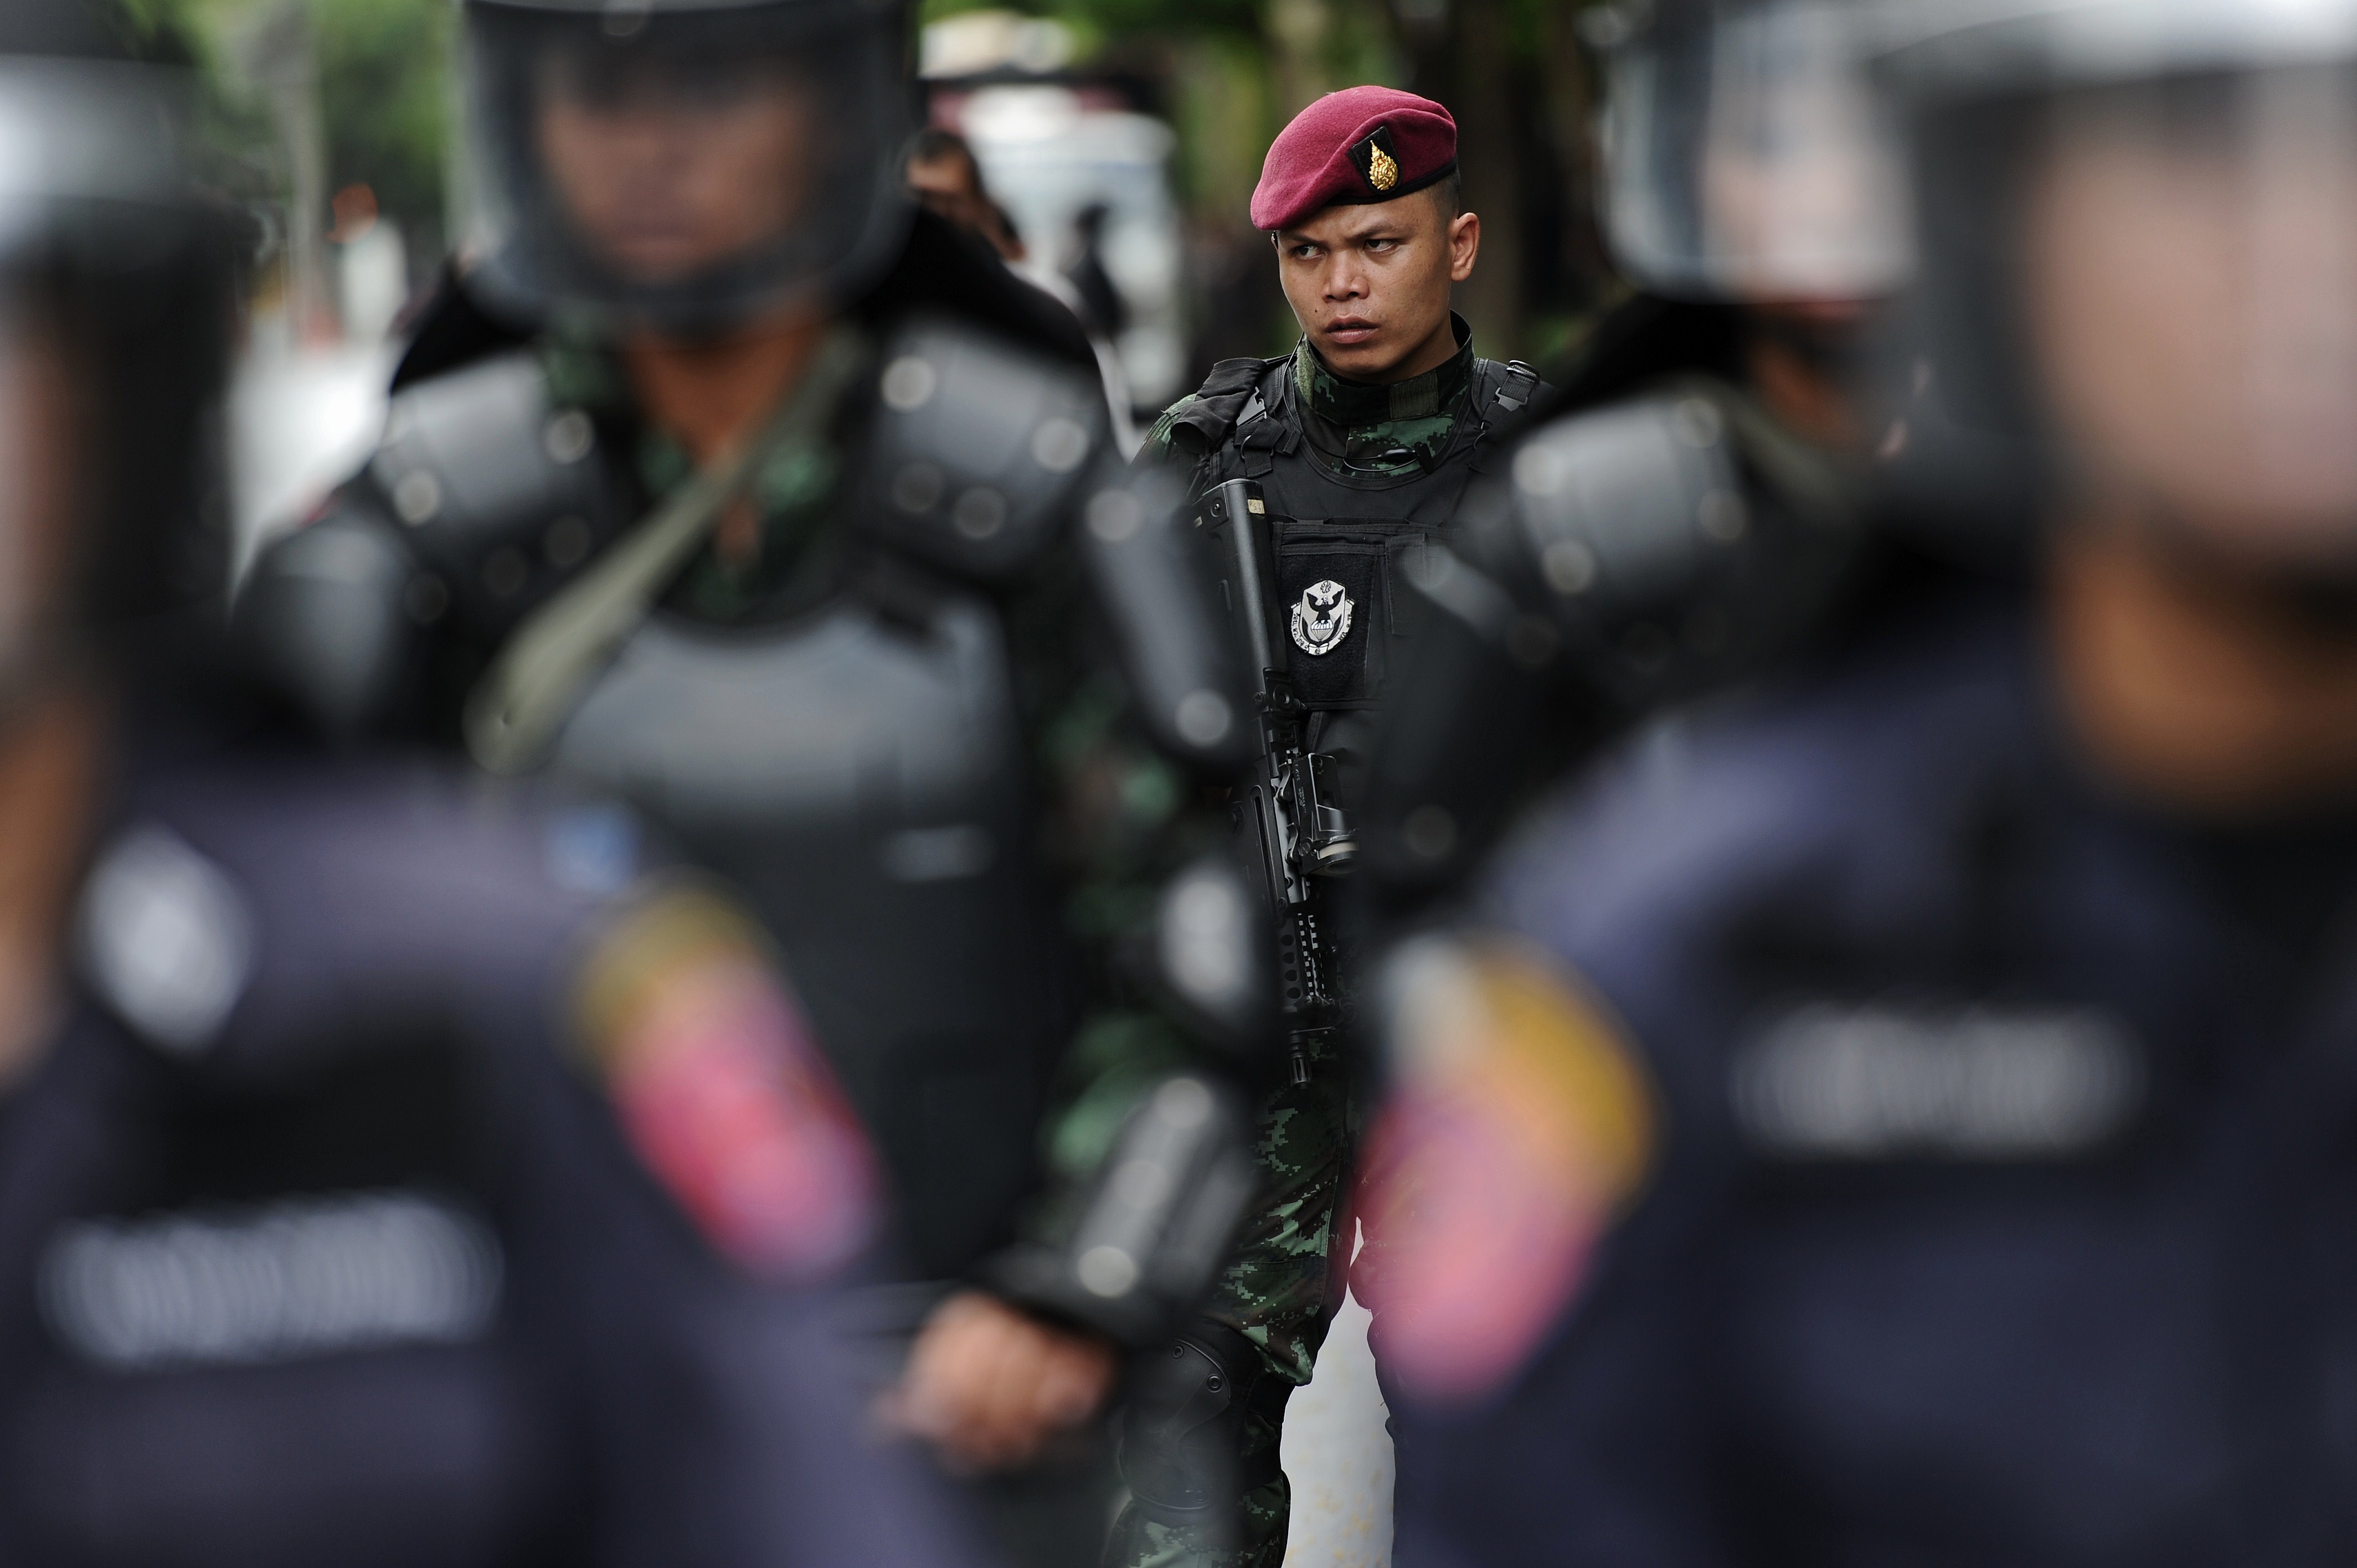 Members of the Thai security forces stand guard outside the Army auditorium in Bangkok where prominent figures including former Prime Minister Yingluck Shinawatra are reporting to the junta on May 23, 2014. (CHRISTOPHE ARCHAMBAULT—AFP/Getty Images)